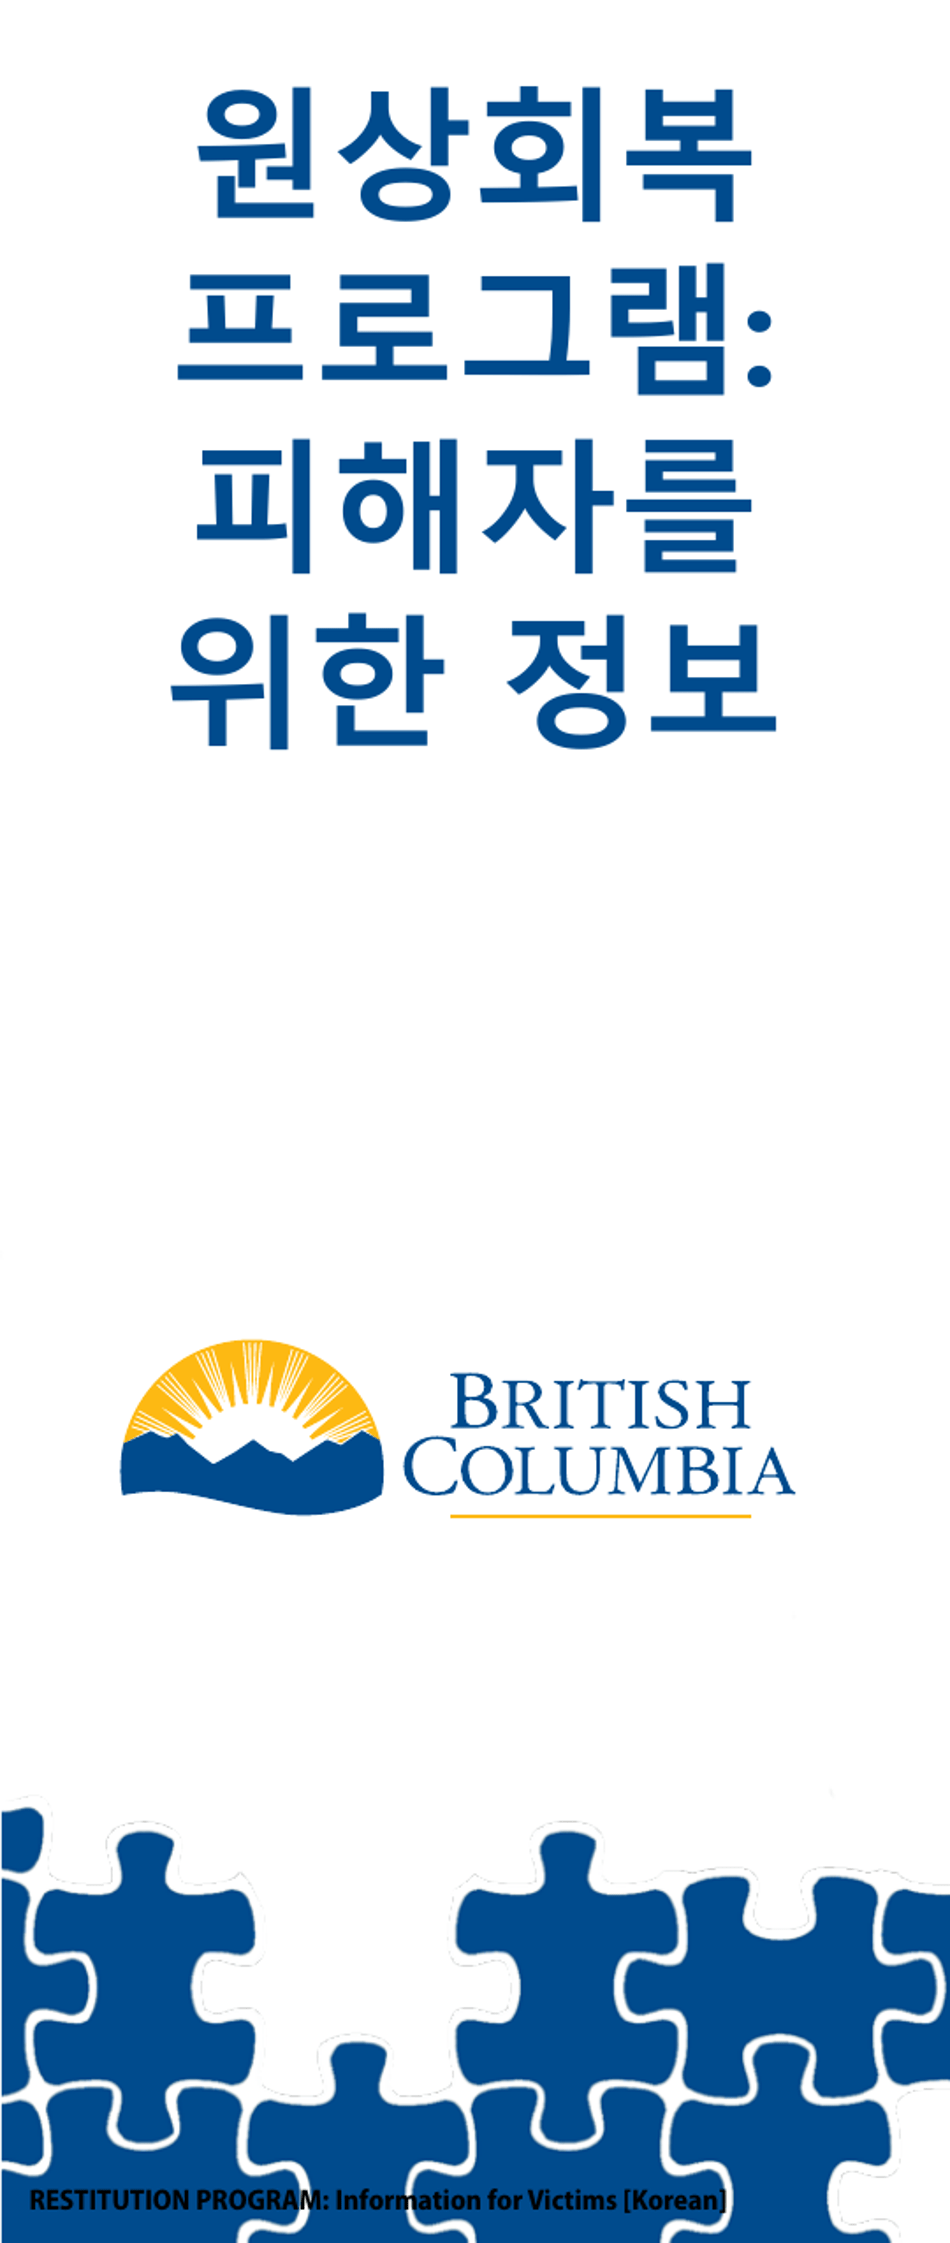 Restitution Program Application Form for Victims - British Columbia, Canada (English / Korean), Page 1